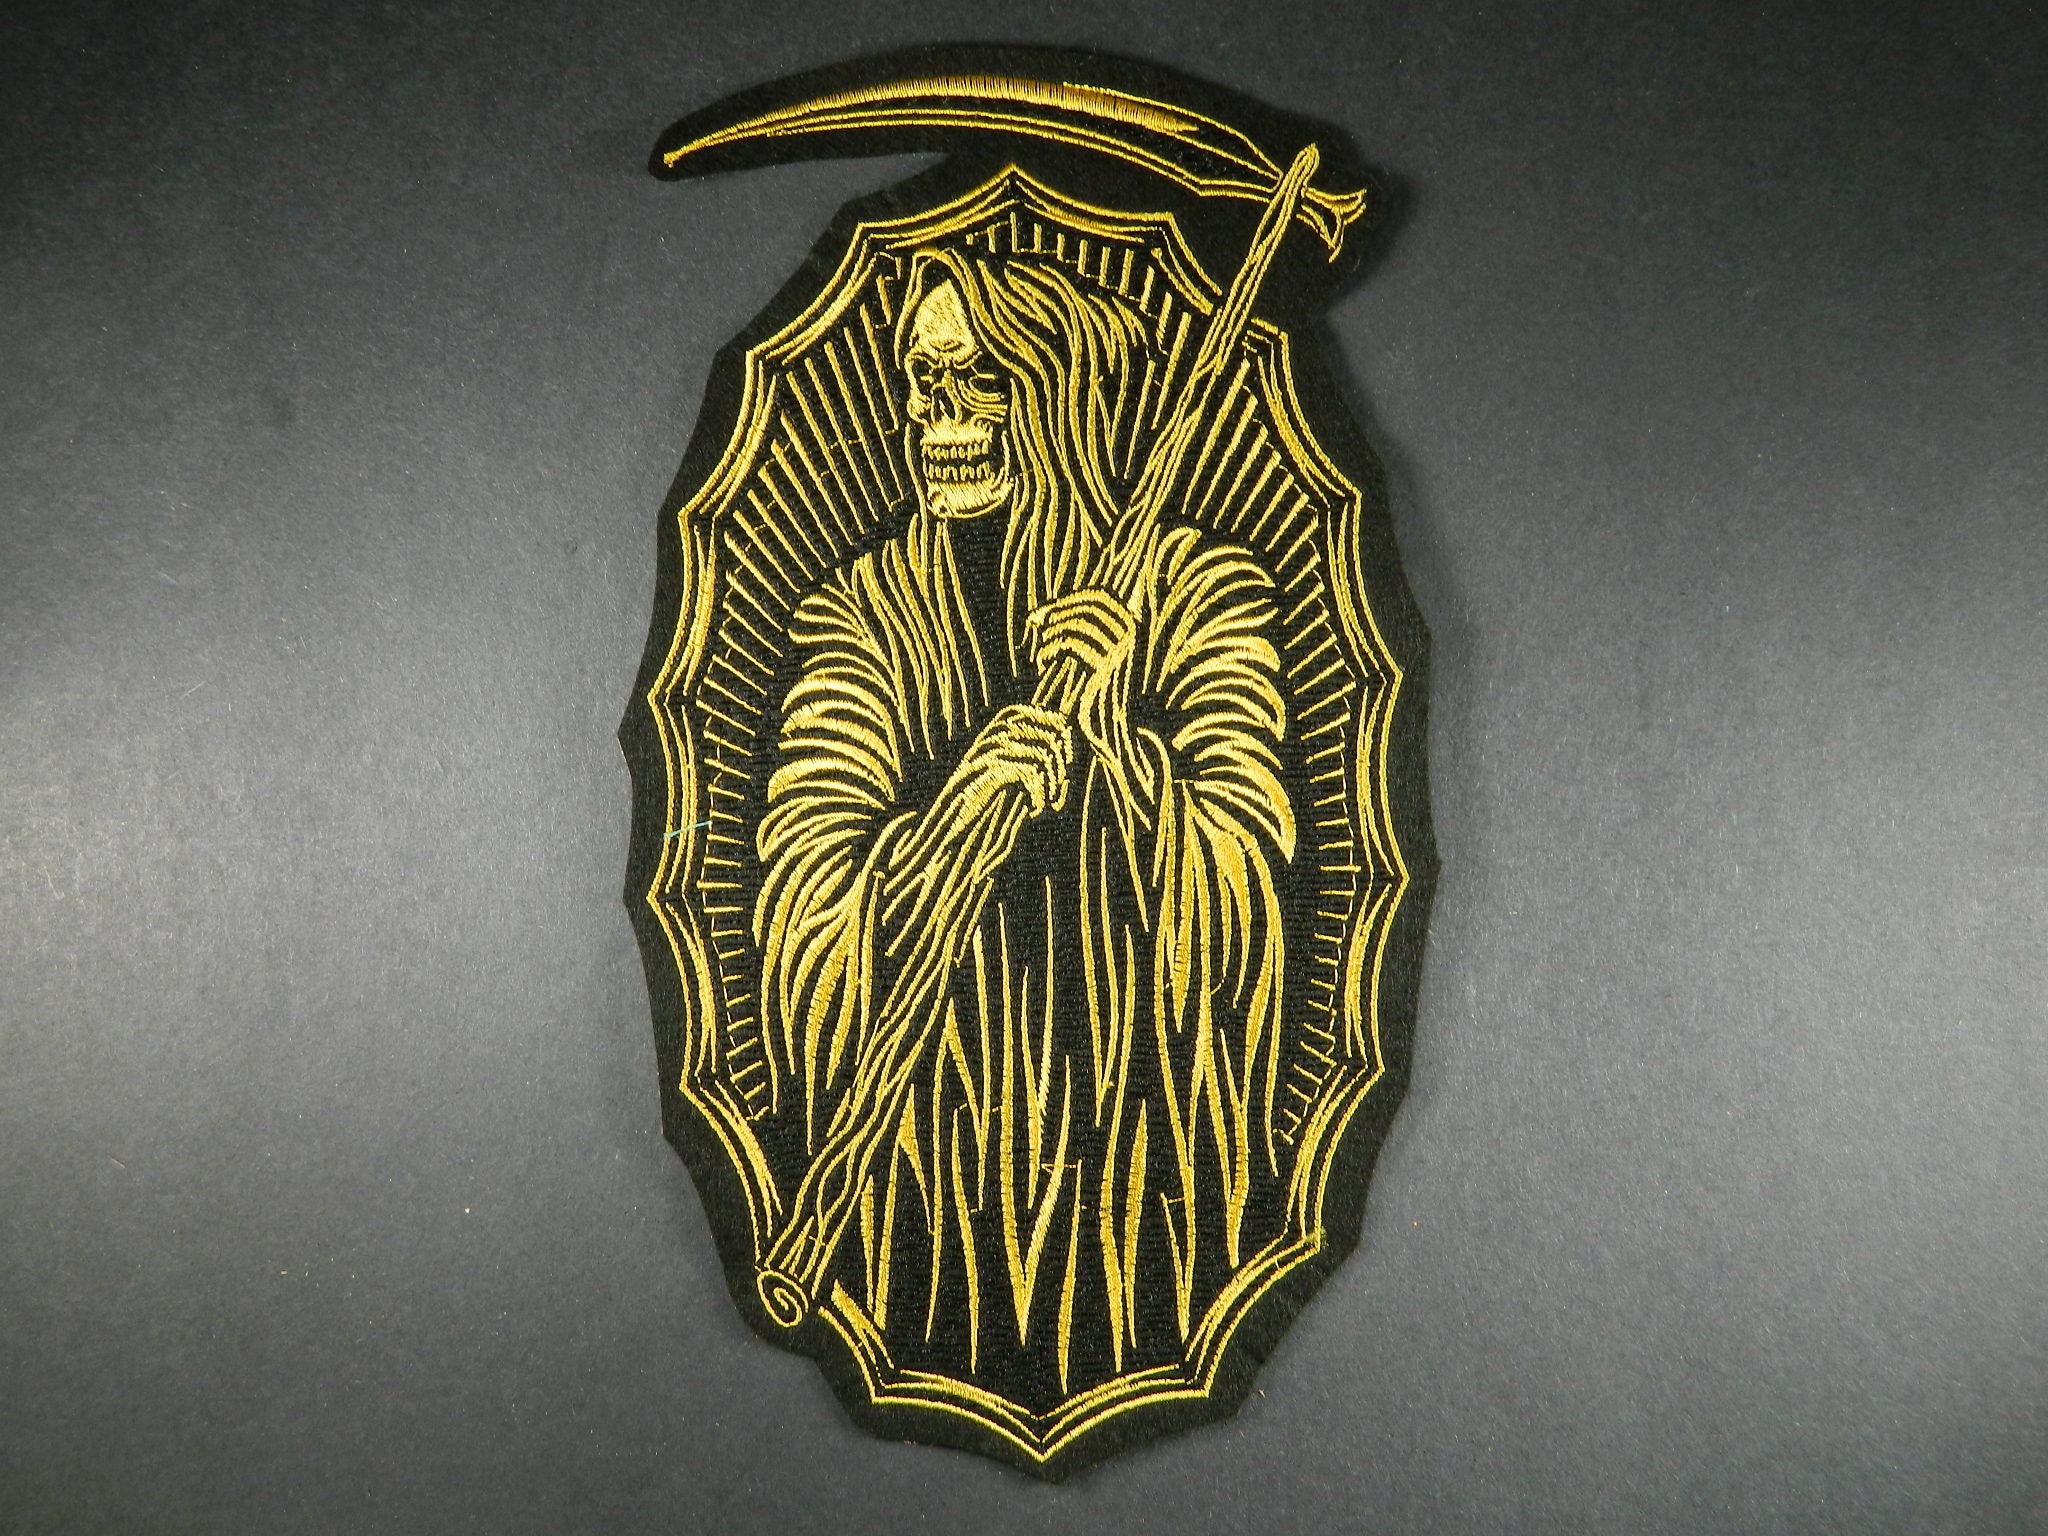 Grim Reaper Large Iron On Patch Quality Back Patches Badge 17 cm x 28.5 cm P570 